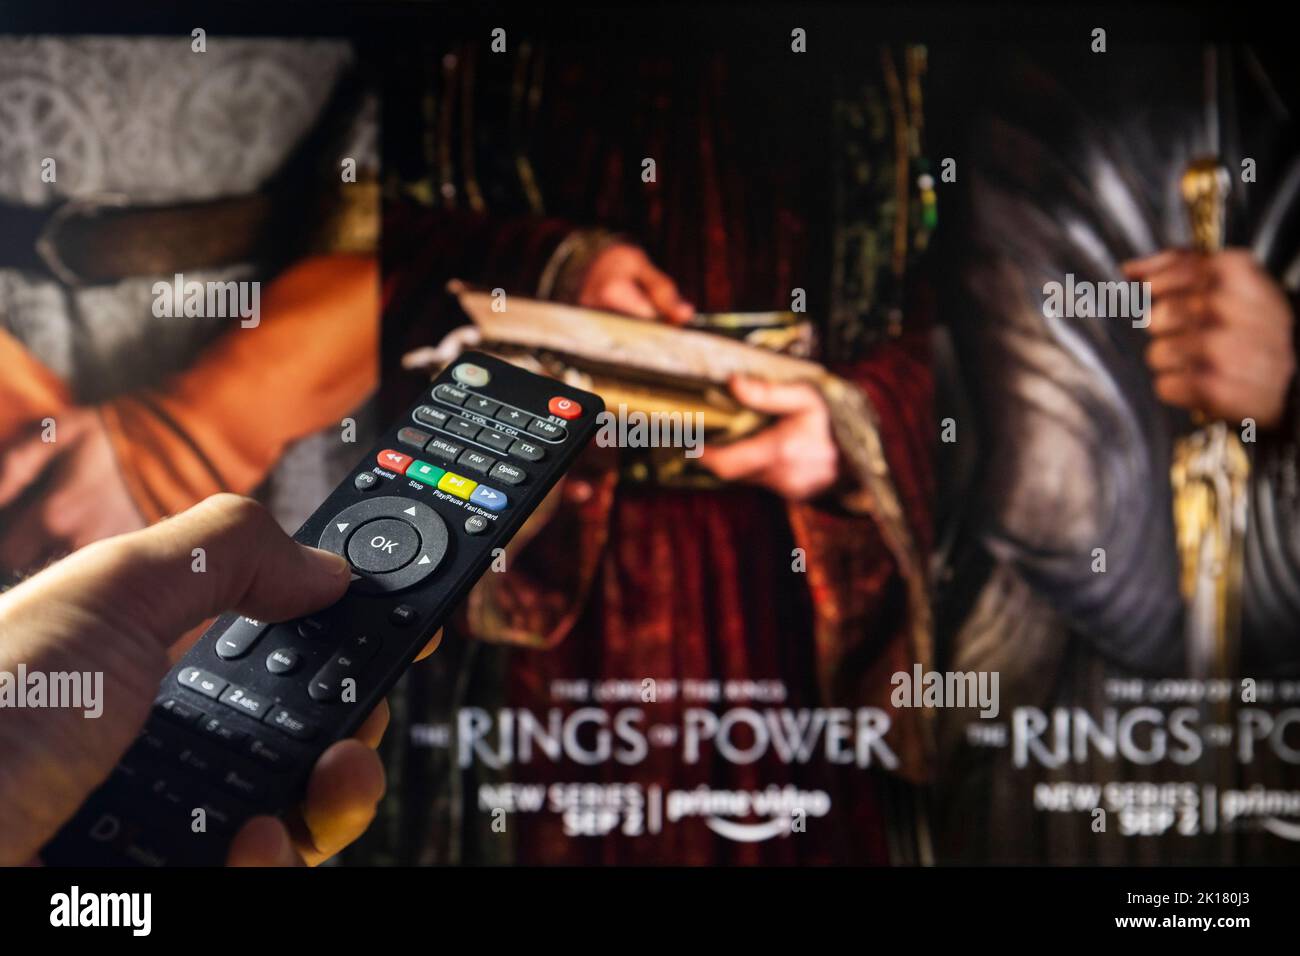 Belgrade, Serbia - September 12, 2022: The Lord of the Rings: The Rings of Power TV series on TV with remote control in hand. Focus on the remote cont Stock Photo